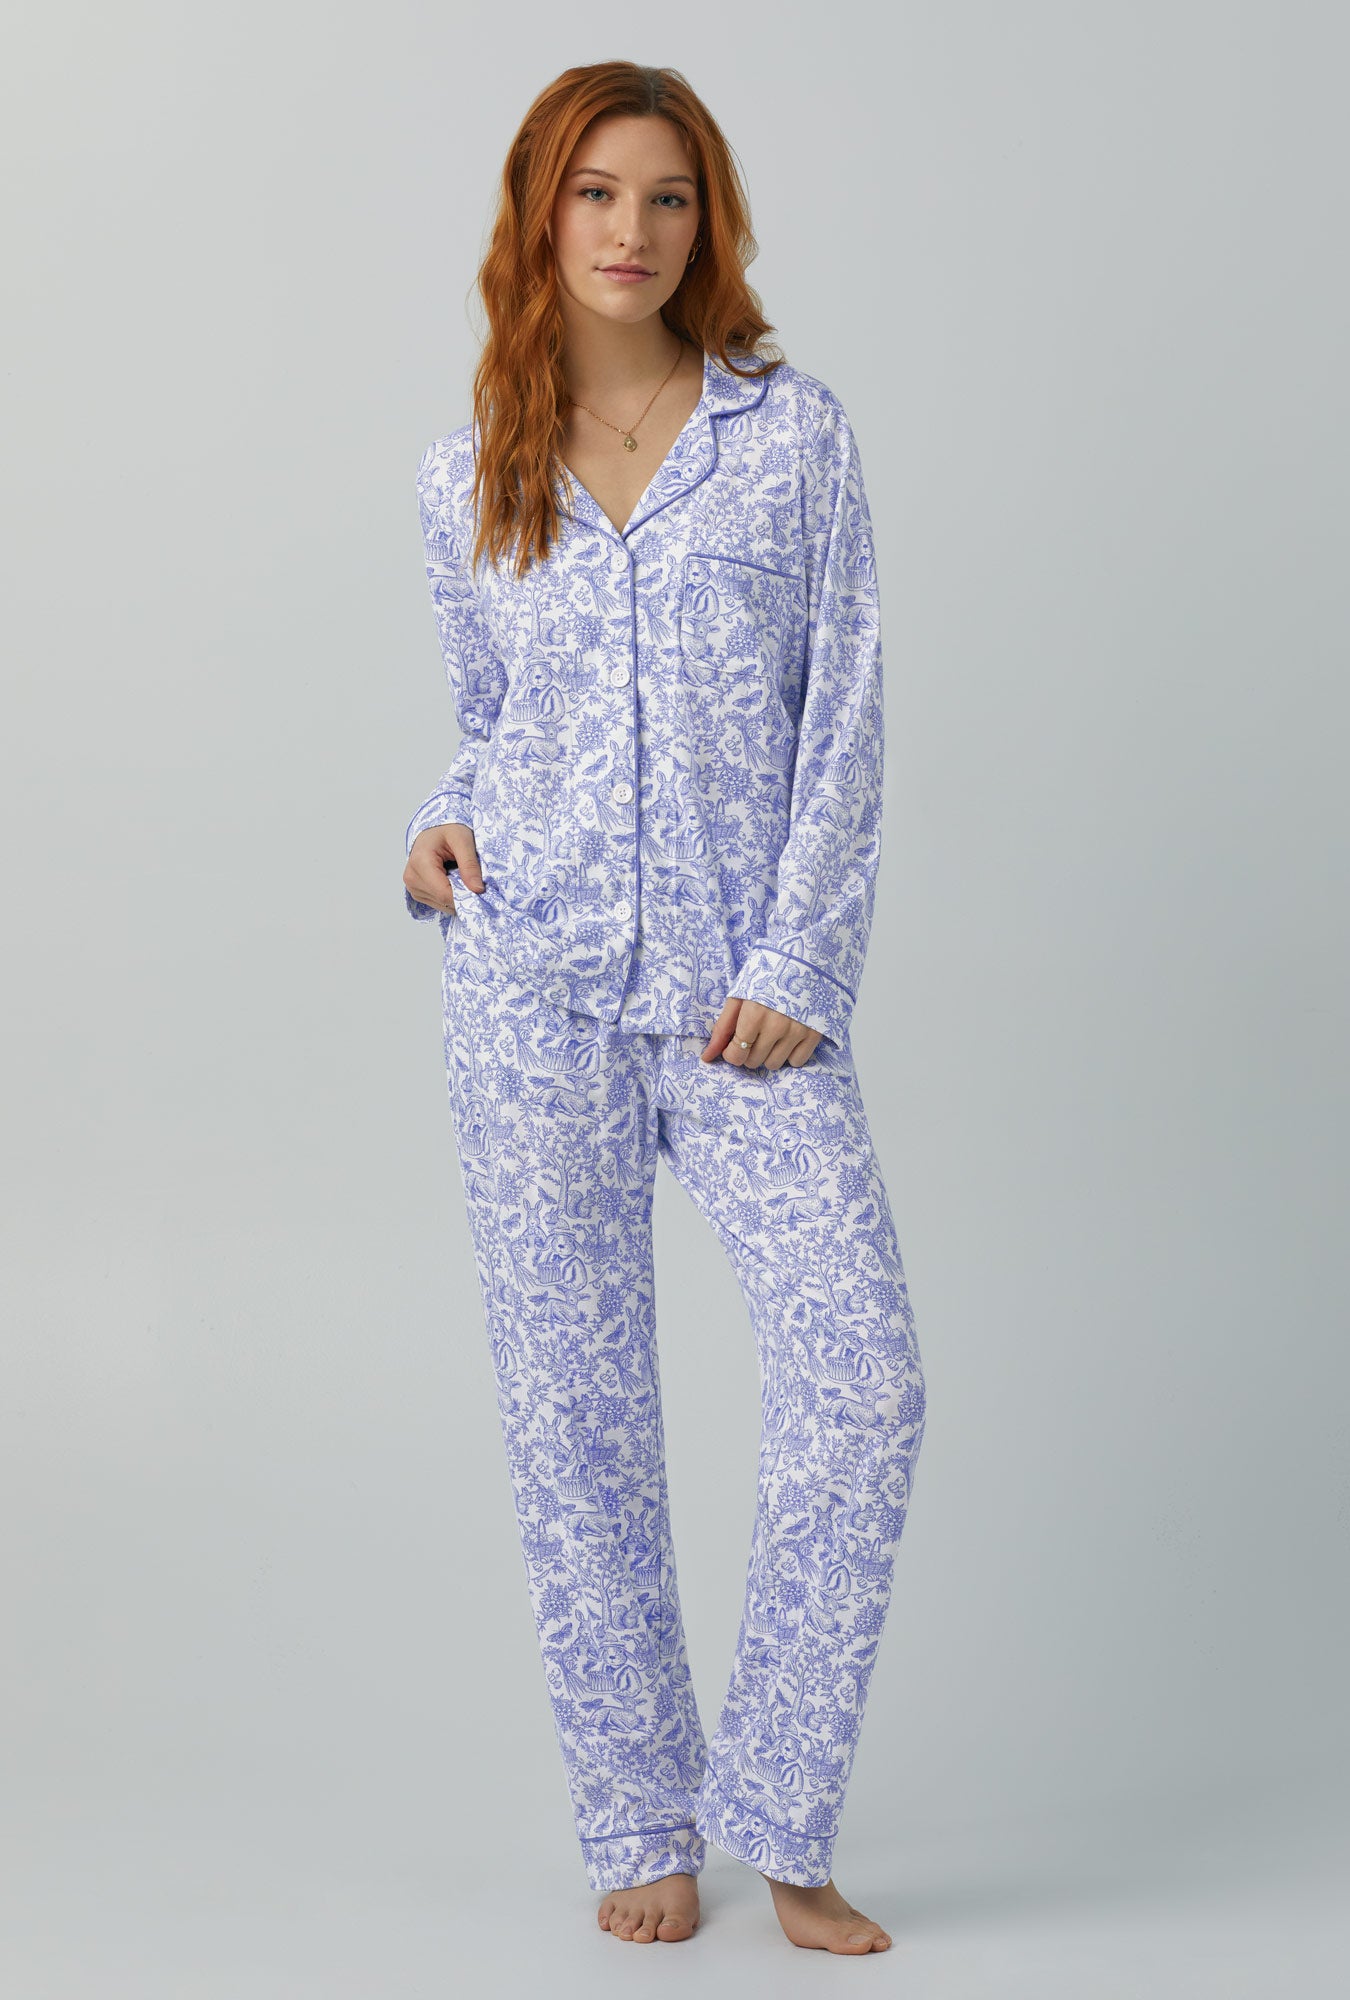 A lady wearing Long Sleeve Classic Stretch Jersey PJ Set with Fairytale Forest print